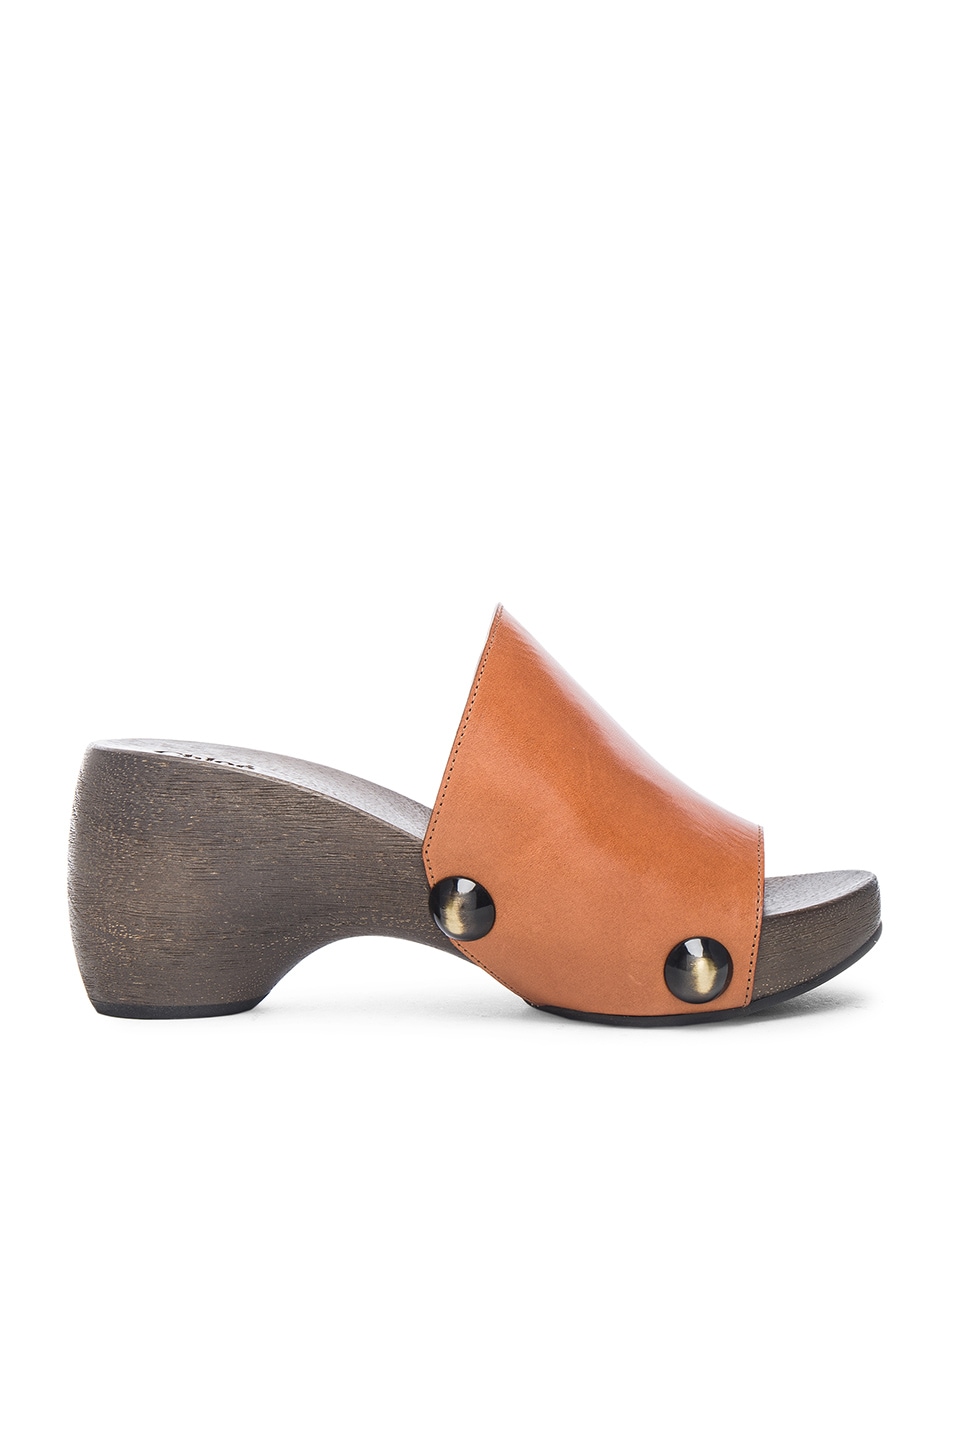 Image 1 of Chloe Wood Clog Leather Sandals in Marron Glace